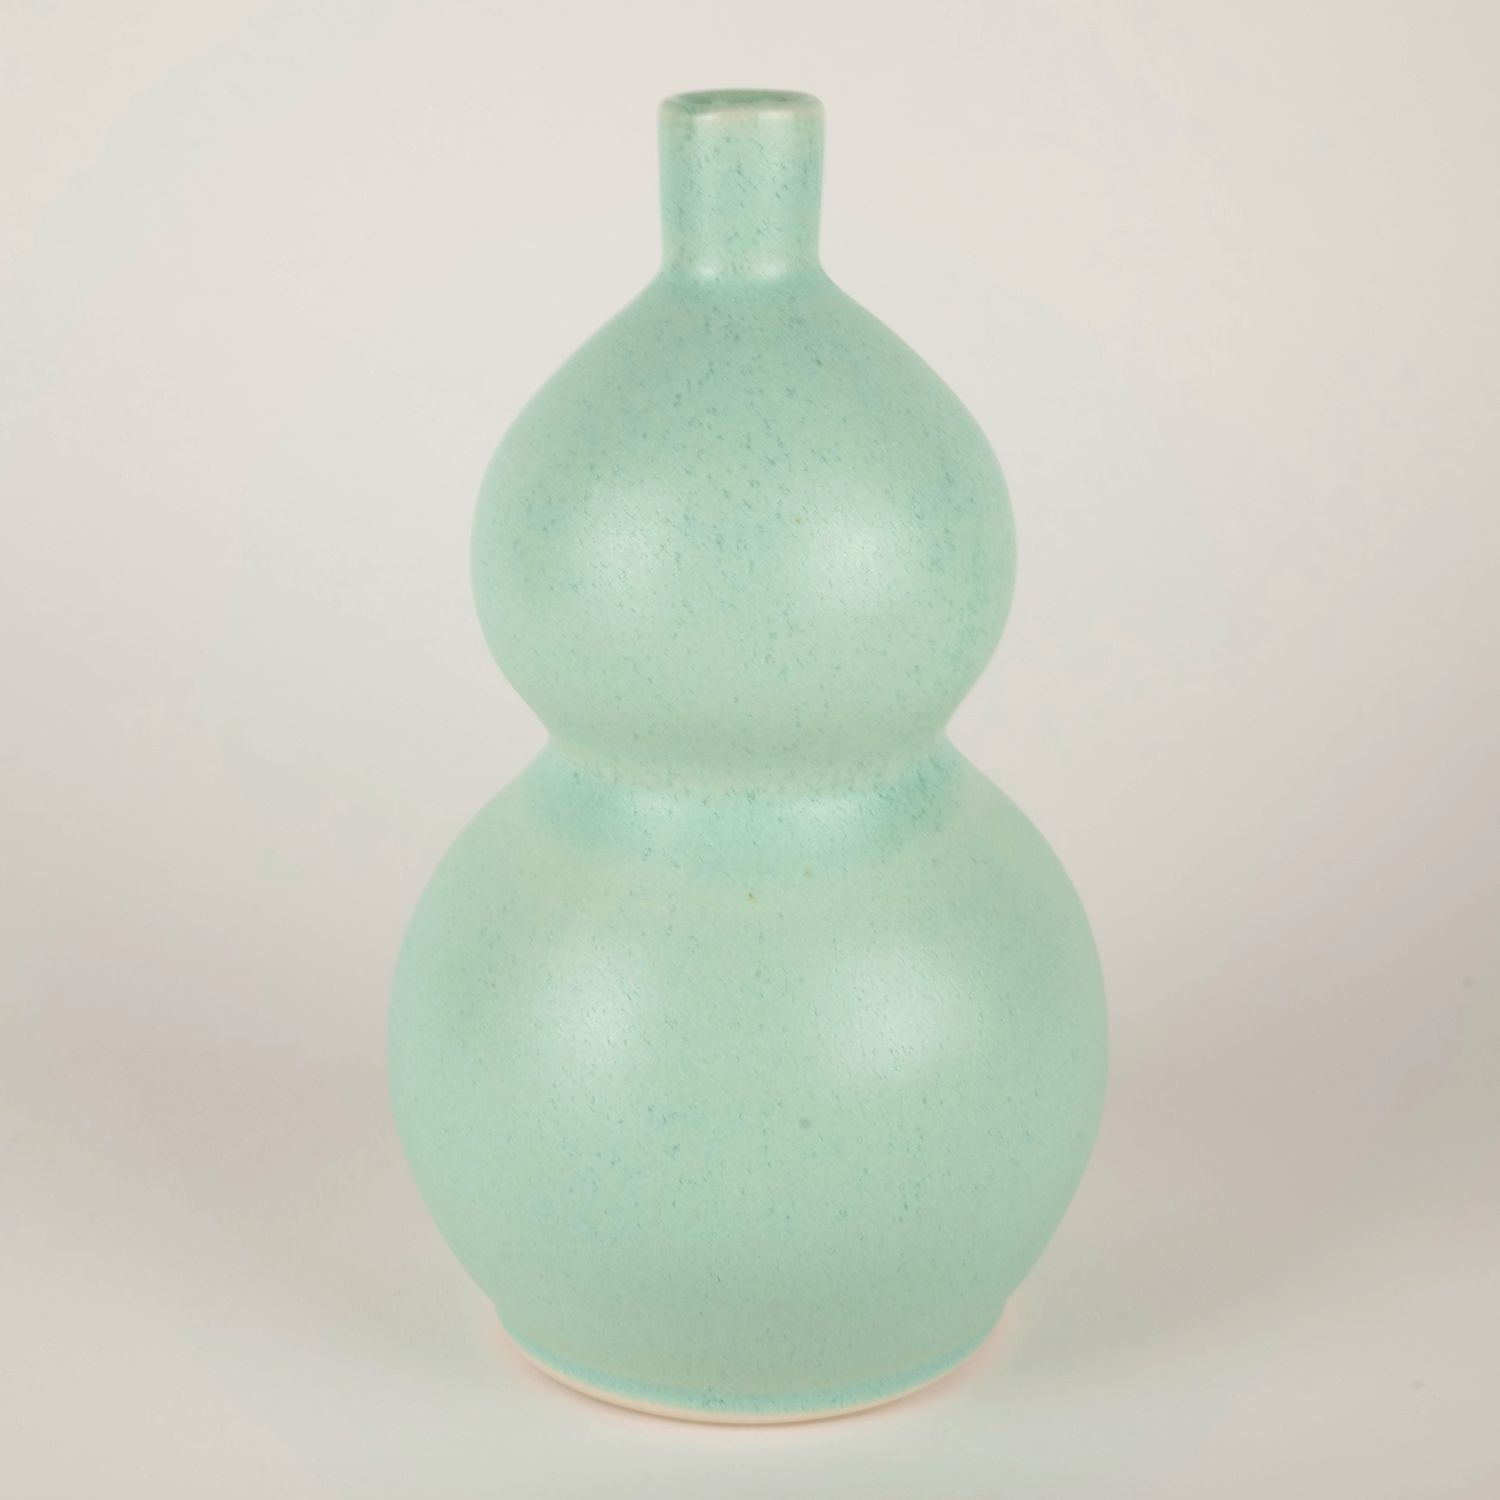 William Lee: Gourd Vase in Green Product Image 1 of 1